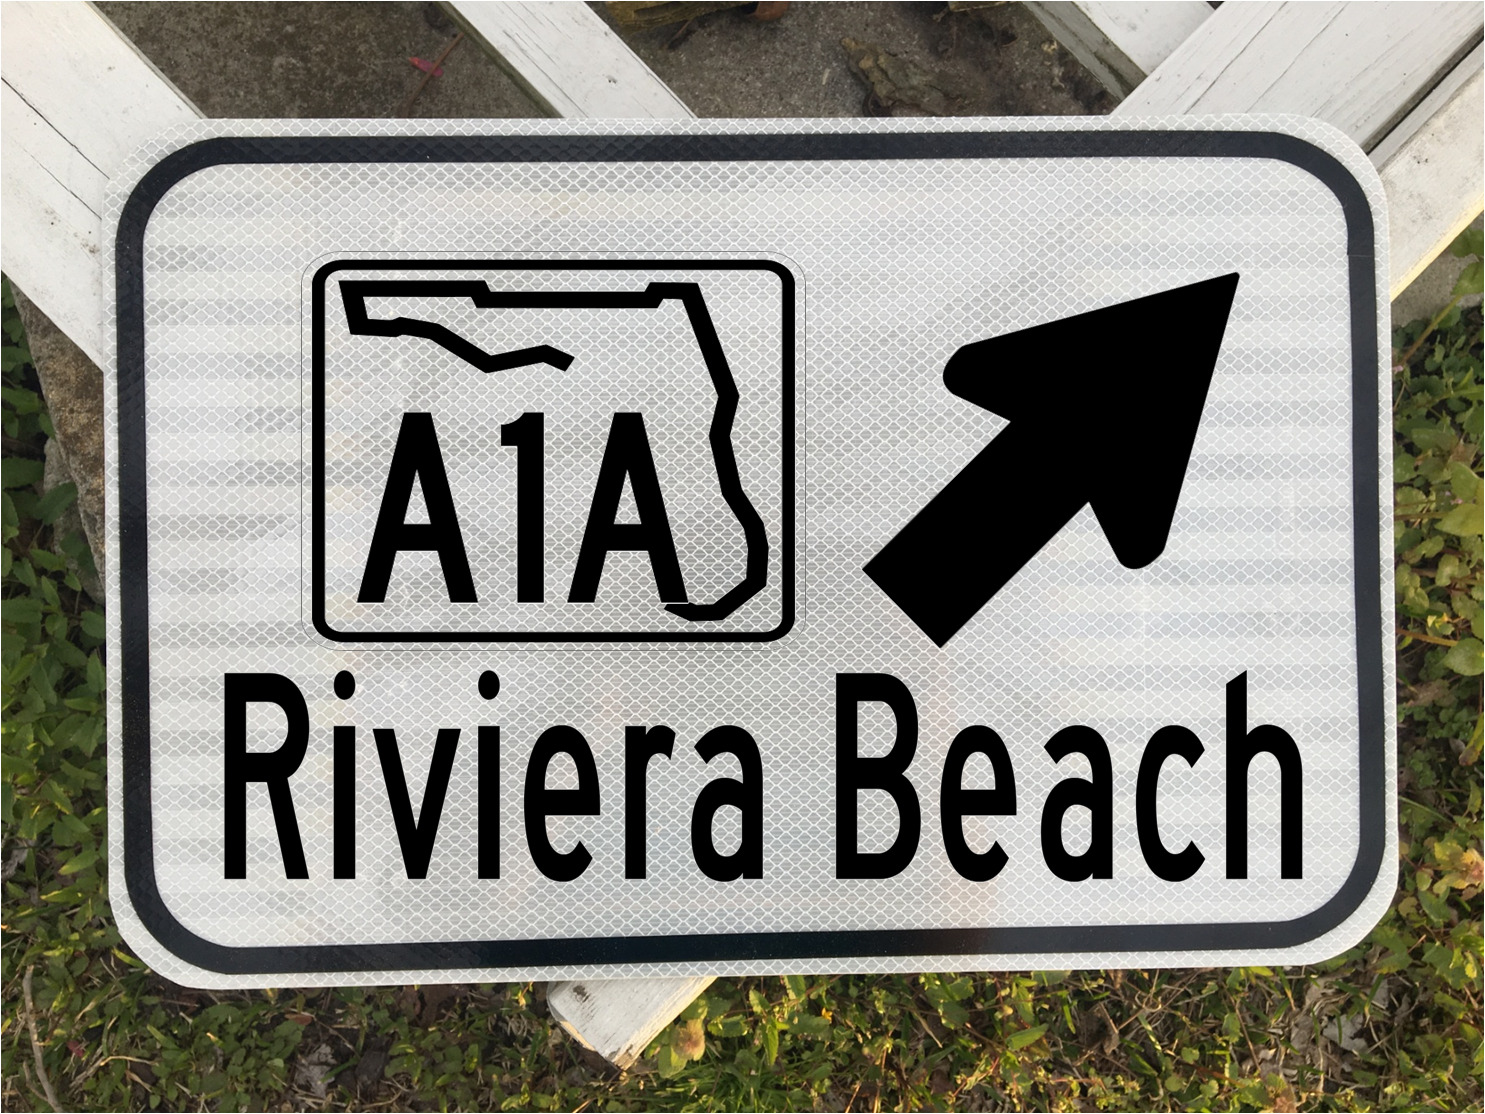 RIVIERA BEACH FLORIDA A1A Highway road sign 12\